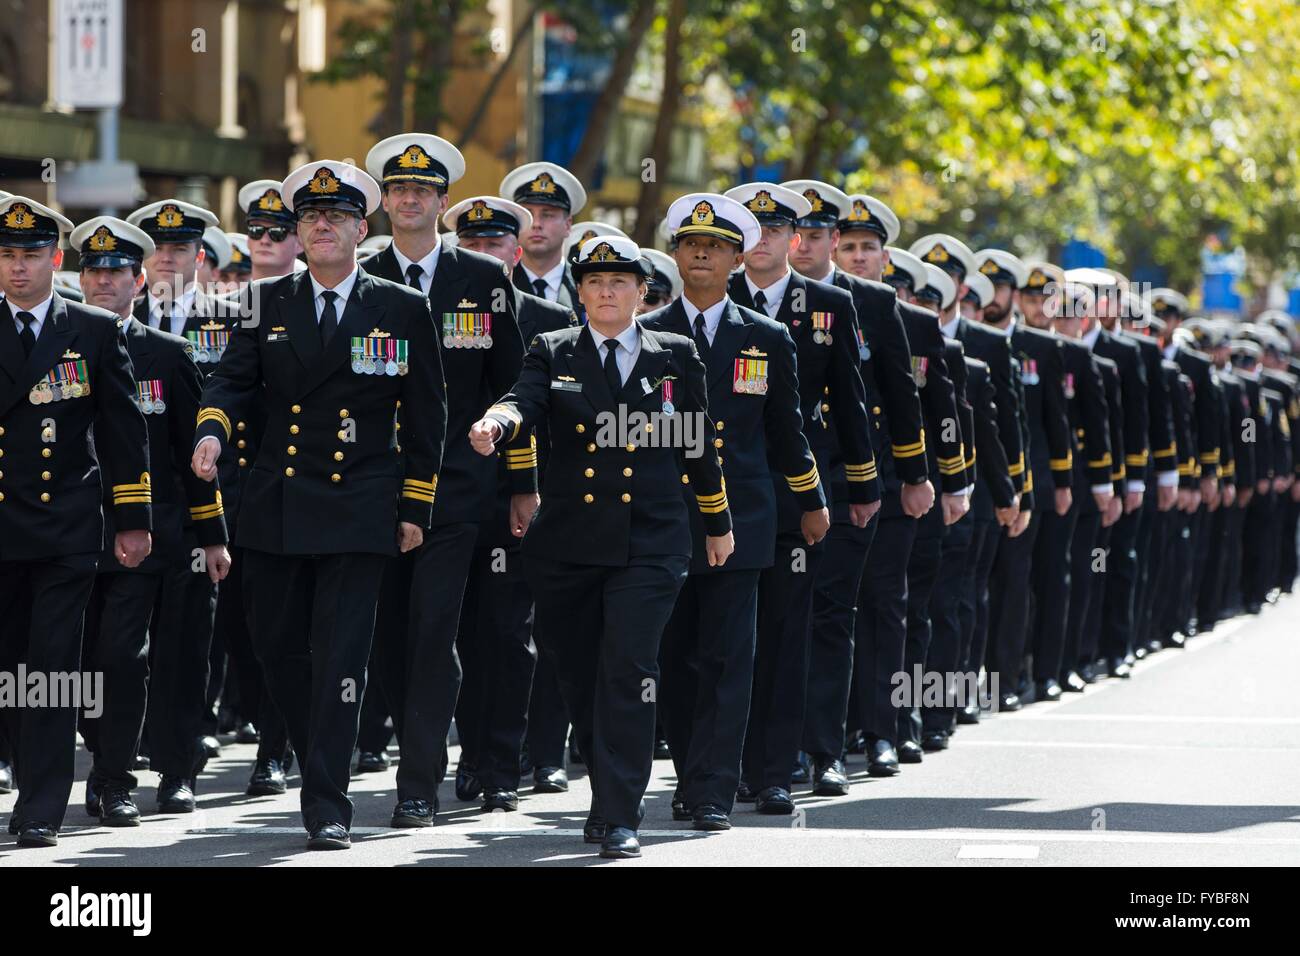 Sydney. 25th Apr, 2016. Photo taken on April 25, 2016 shows Australian royal navy team marching during the ANZAC Day Parade in Sydney, Australia. ANZAC Day is a national day of remembrance in Australia and New Zealand originally to honor the members of the Australian and New Zealand Army Corps (ANZAC) who fought at Gallipoli during World War I but now more to commemorate all those who served and died in military operations for their countries. Credit:  Zhu Hongye/Xinhua/Alamy Live News Stock Photo